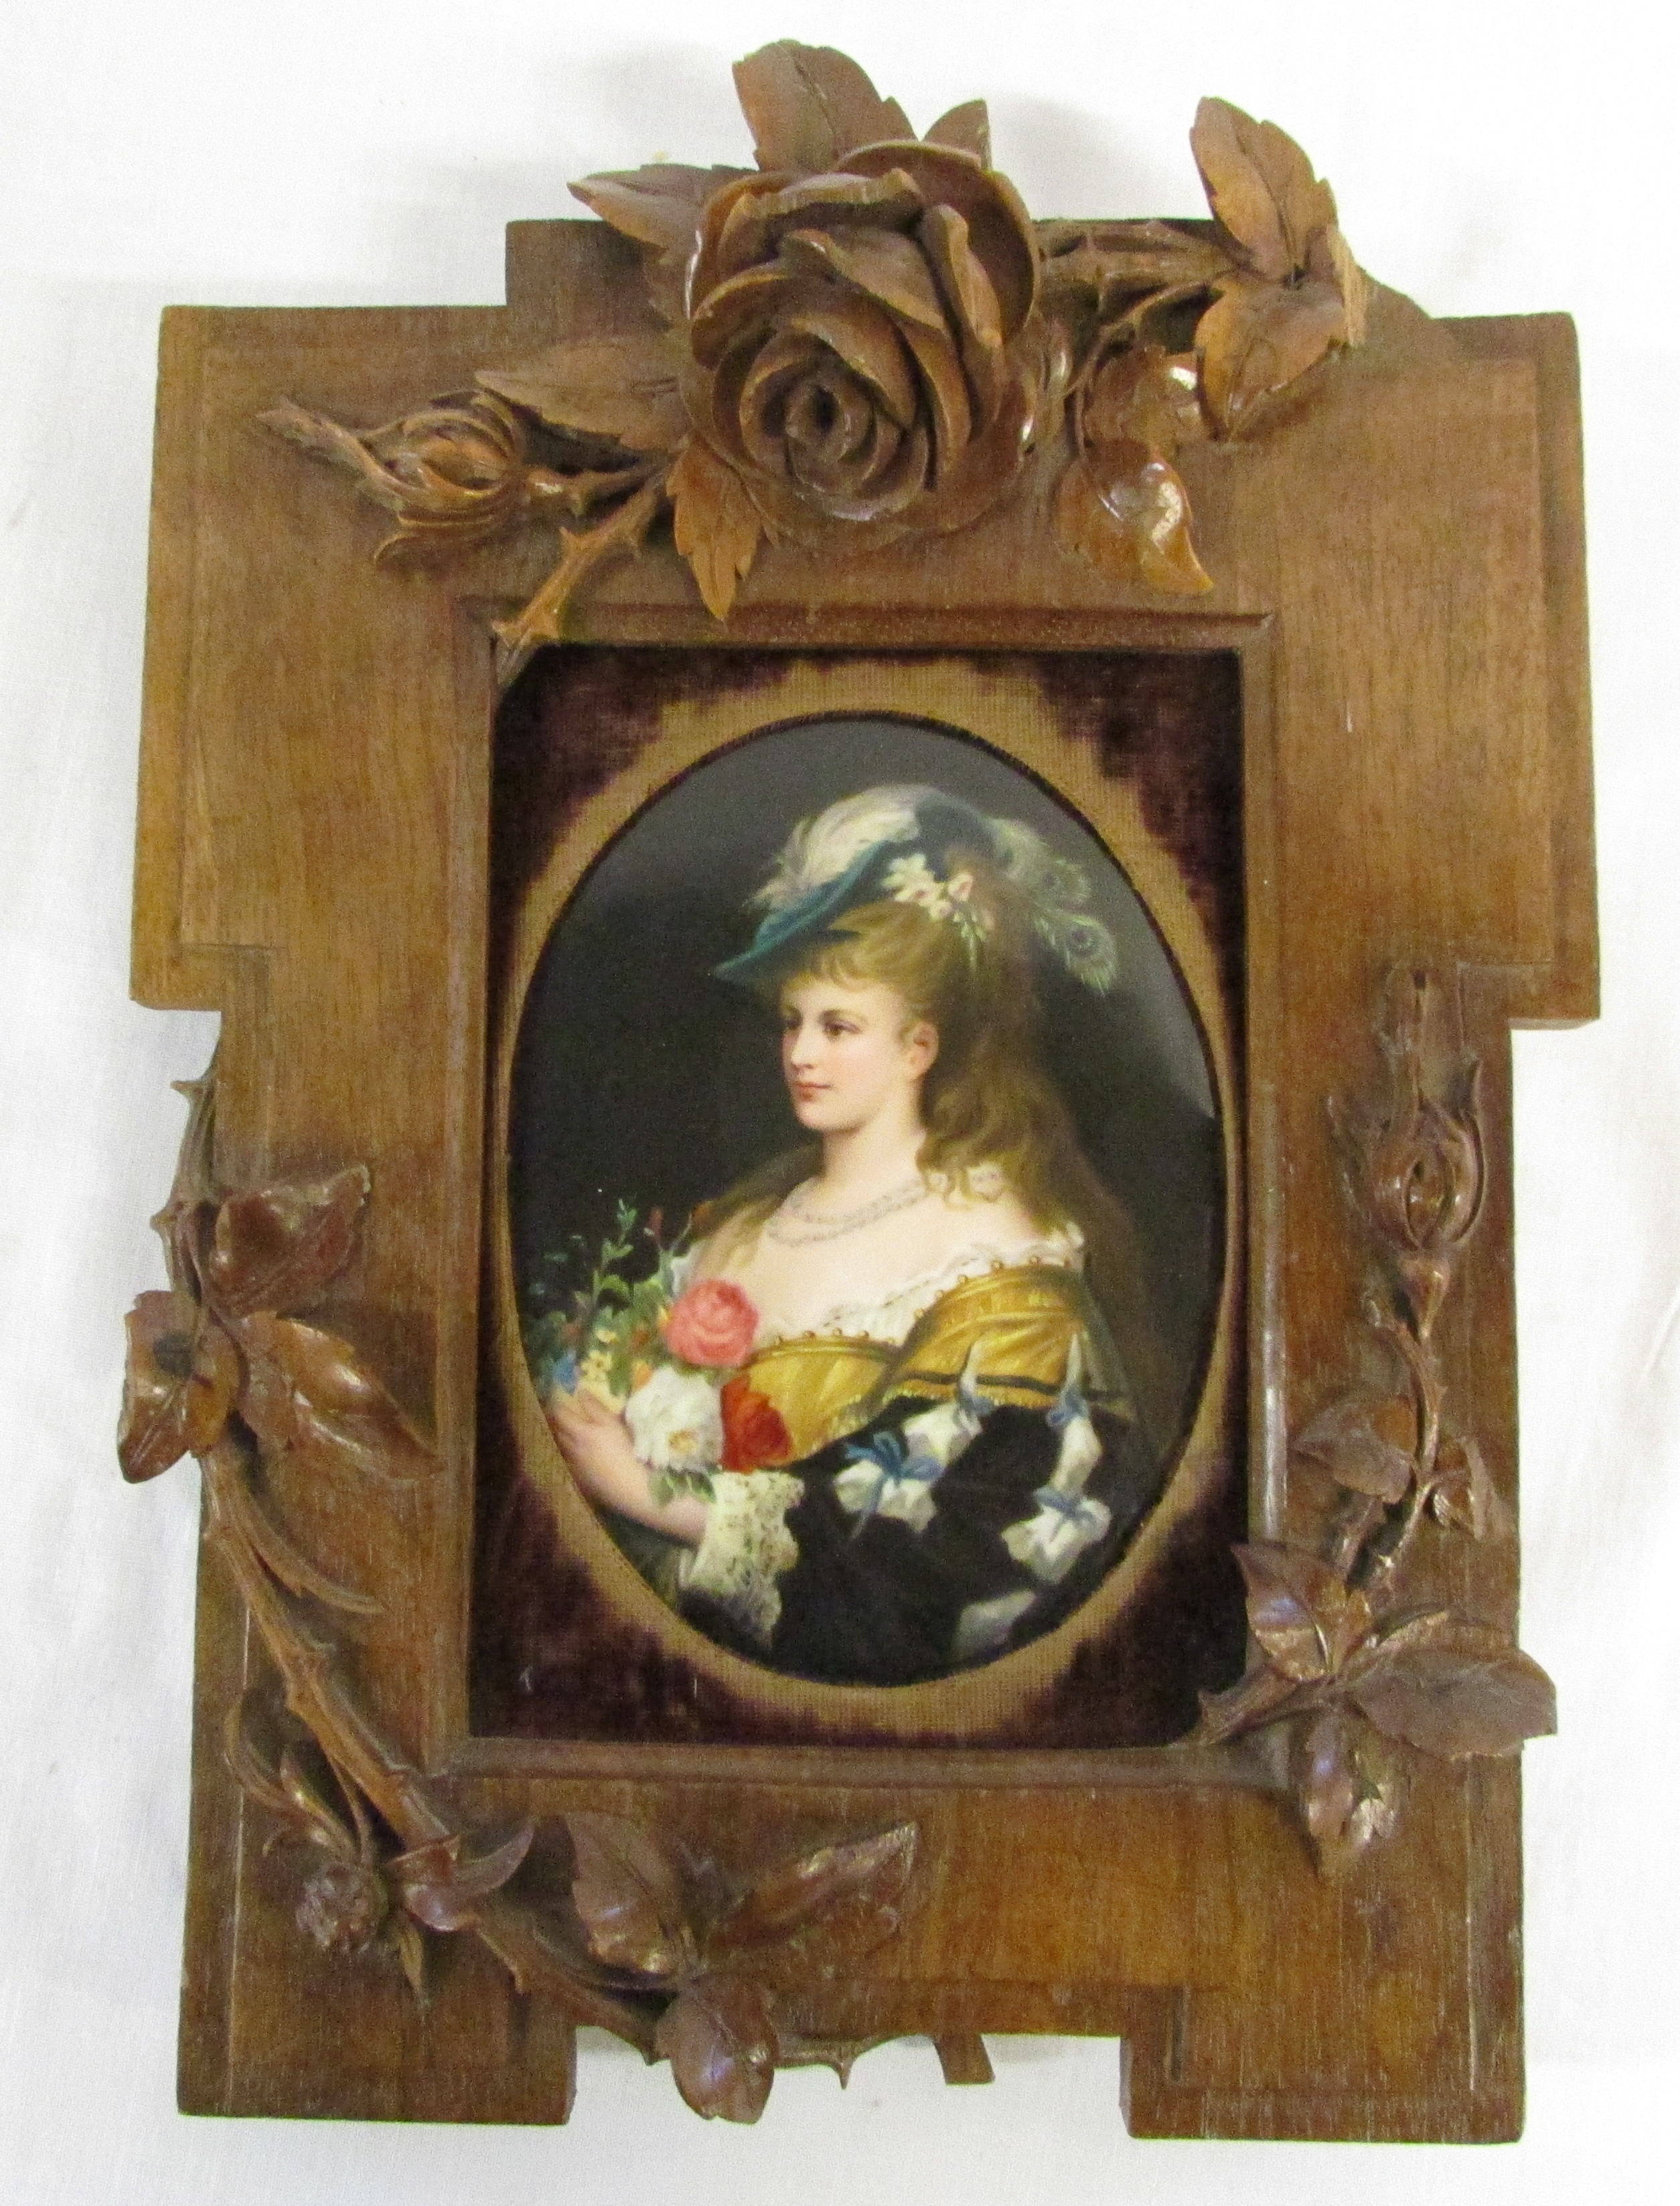 Miniature portrait painting of a lady approx 9cm x 12 cm in a carved wooden frame 18 cm x 26 cm - Image 4 of 4